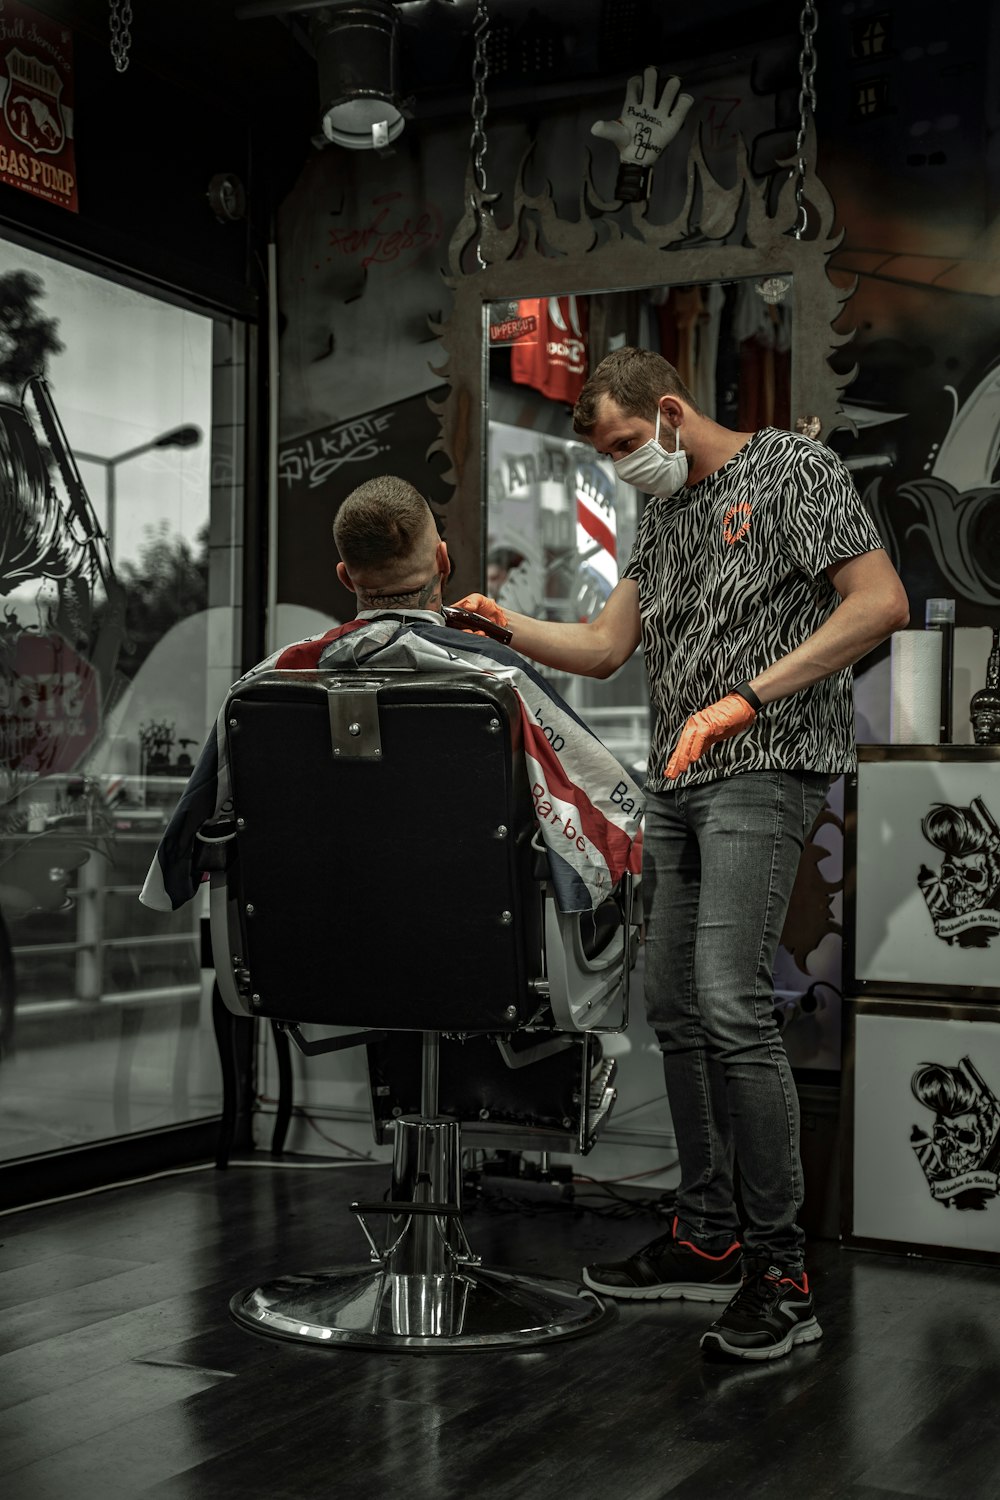 man in black and white shirt sitting on barber chair